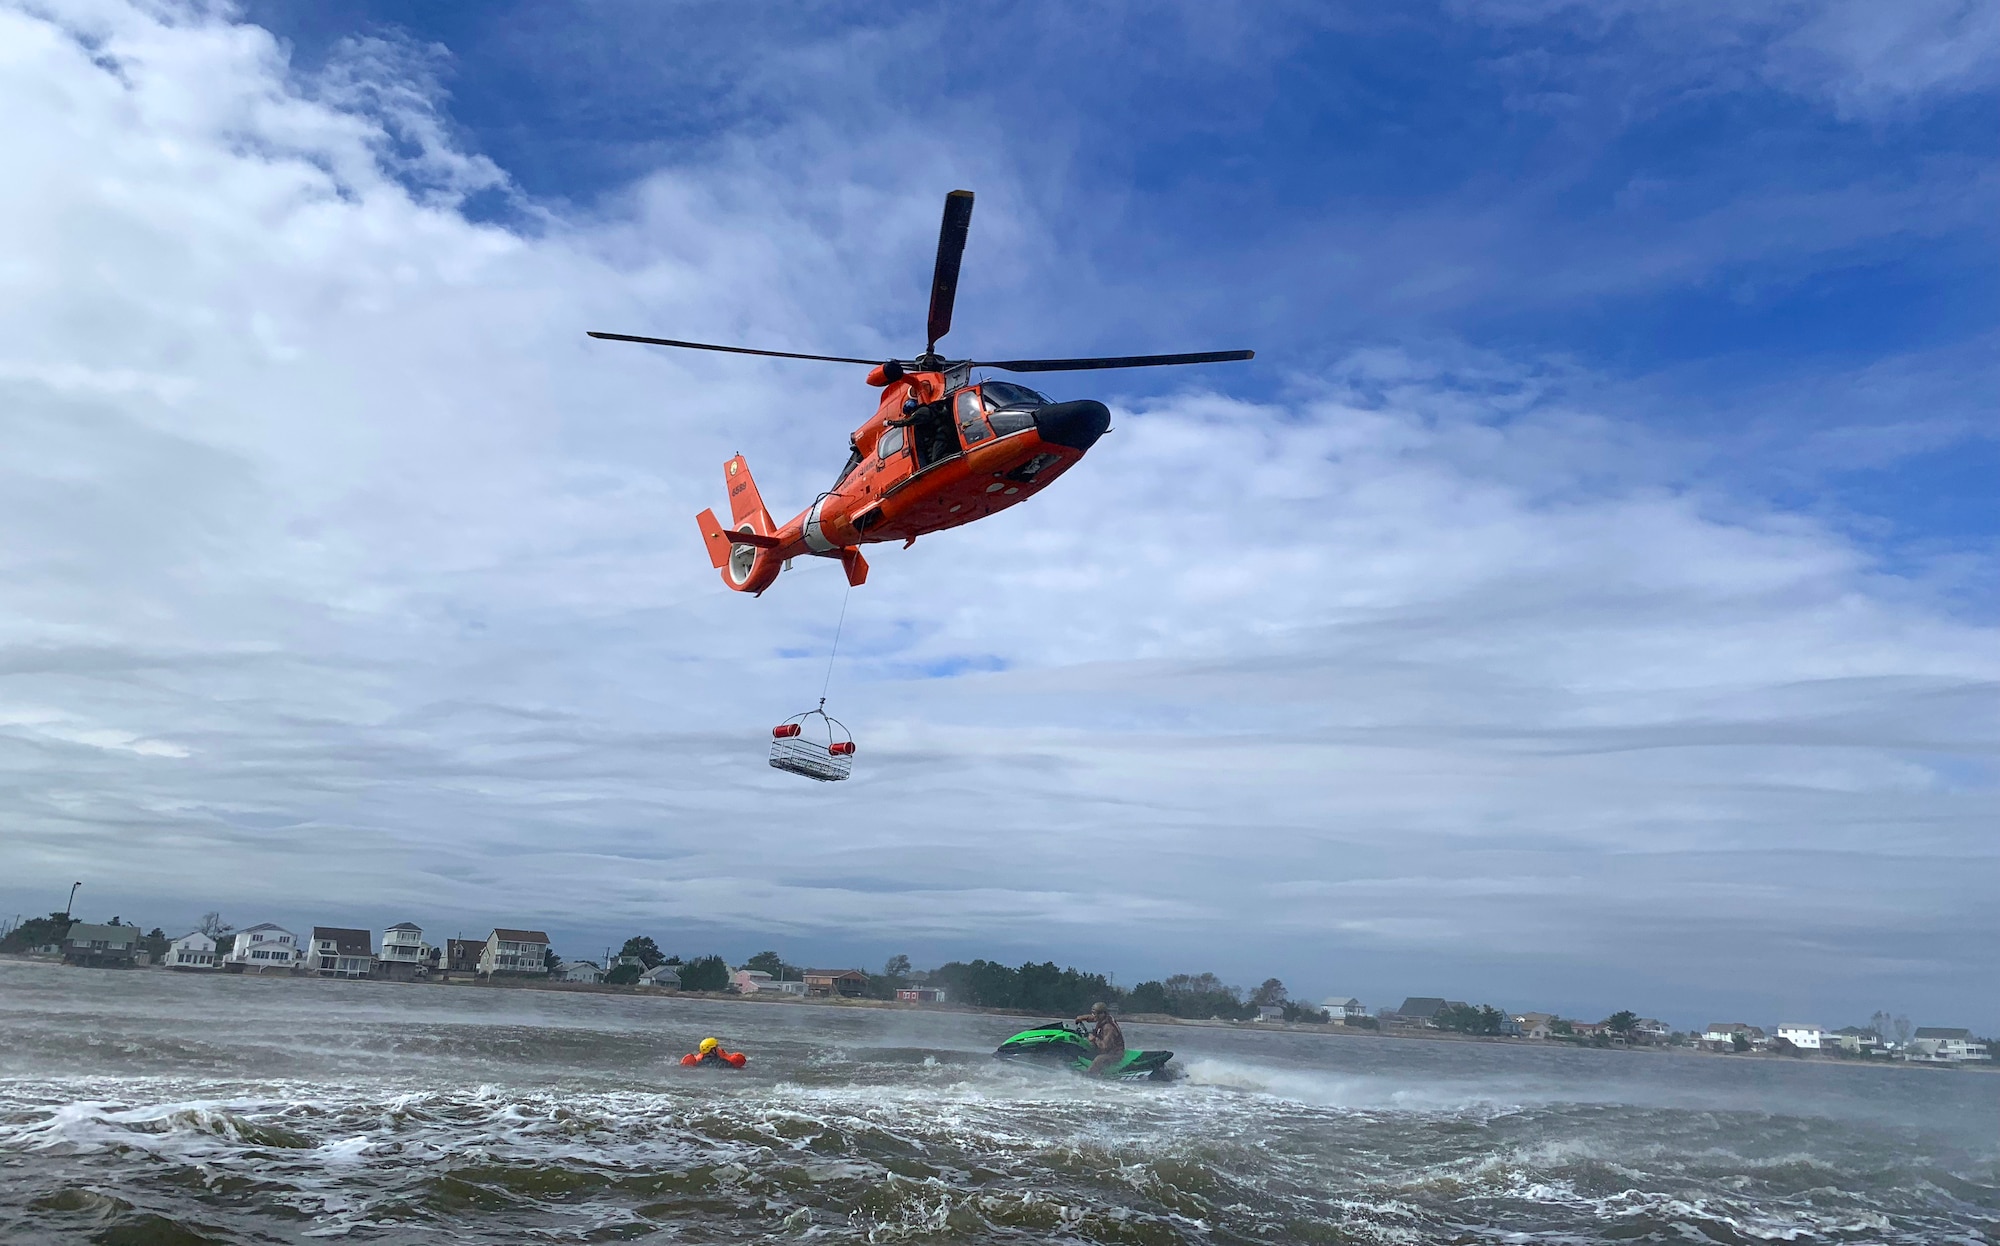 A Coast Guard HH-65 Dolphin helicopter lowers a rescue basket as a USCG rescue diver instructs an Air Force student how to safely ascend during water survival training Sept. 27, 2018, in the Atlantic Ocean off the coast of Bowers Beach, Del. This simulation provides Airmen with an opportunity to use the skills and tactics they learned in the classroom portion of the training.